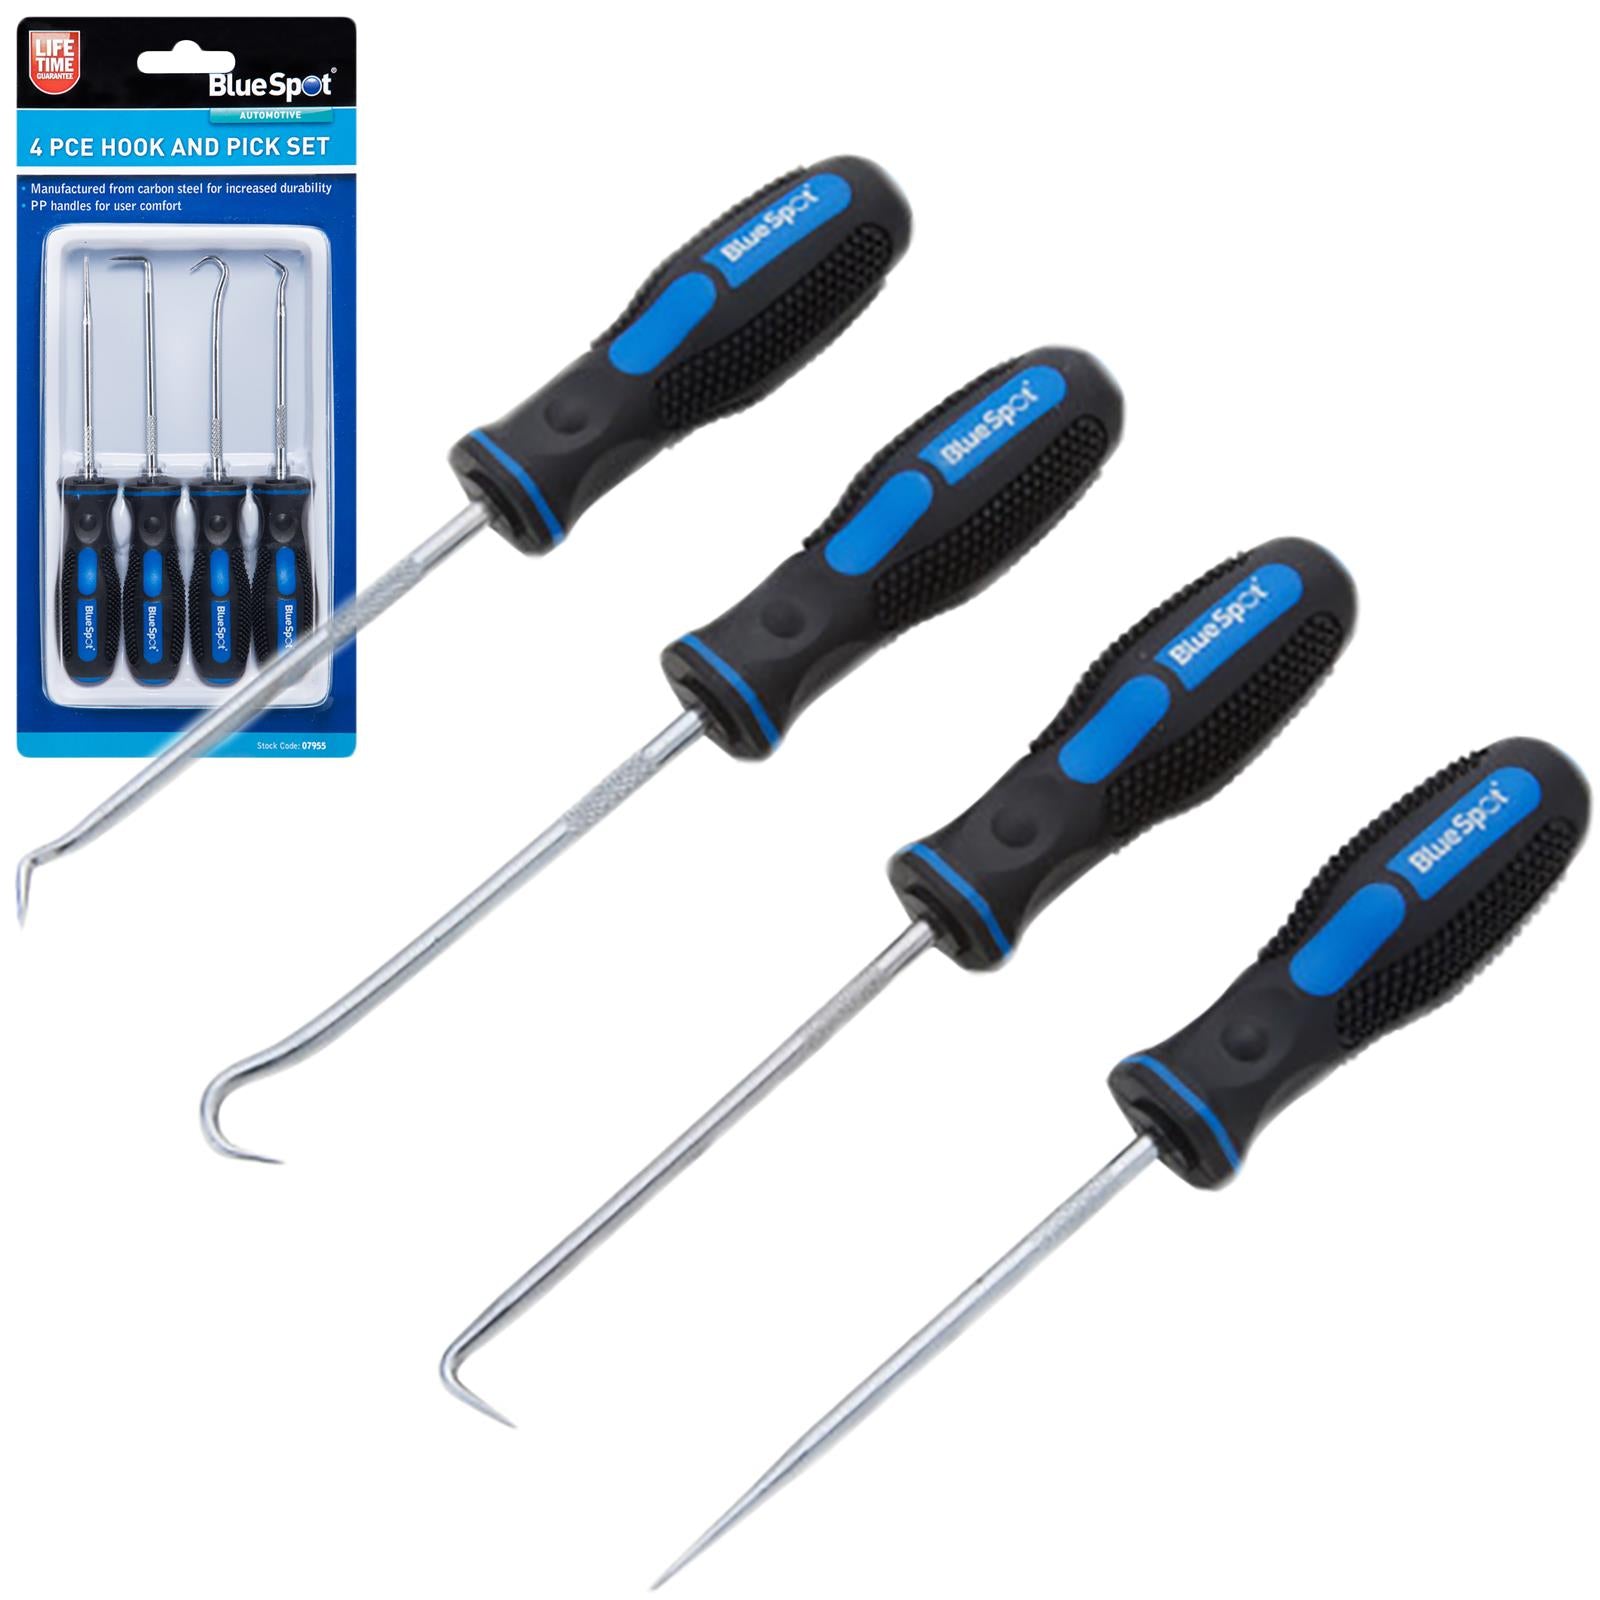 BlueSpot Hook and Pick Set 4 Piece Soft Grip Handles O Ring Oil Seal Removal Tool